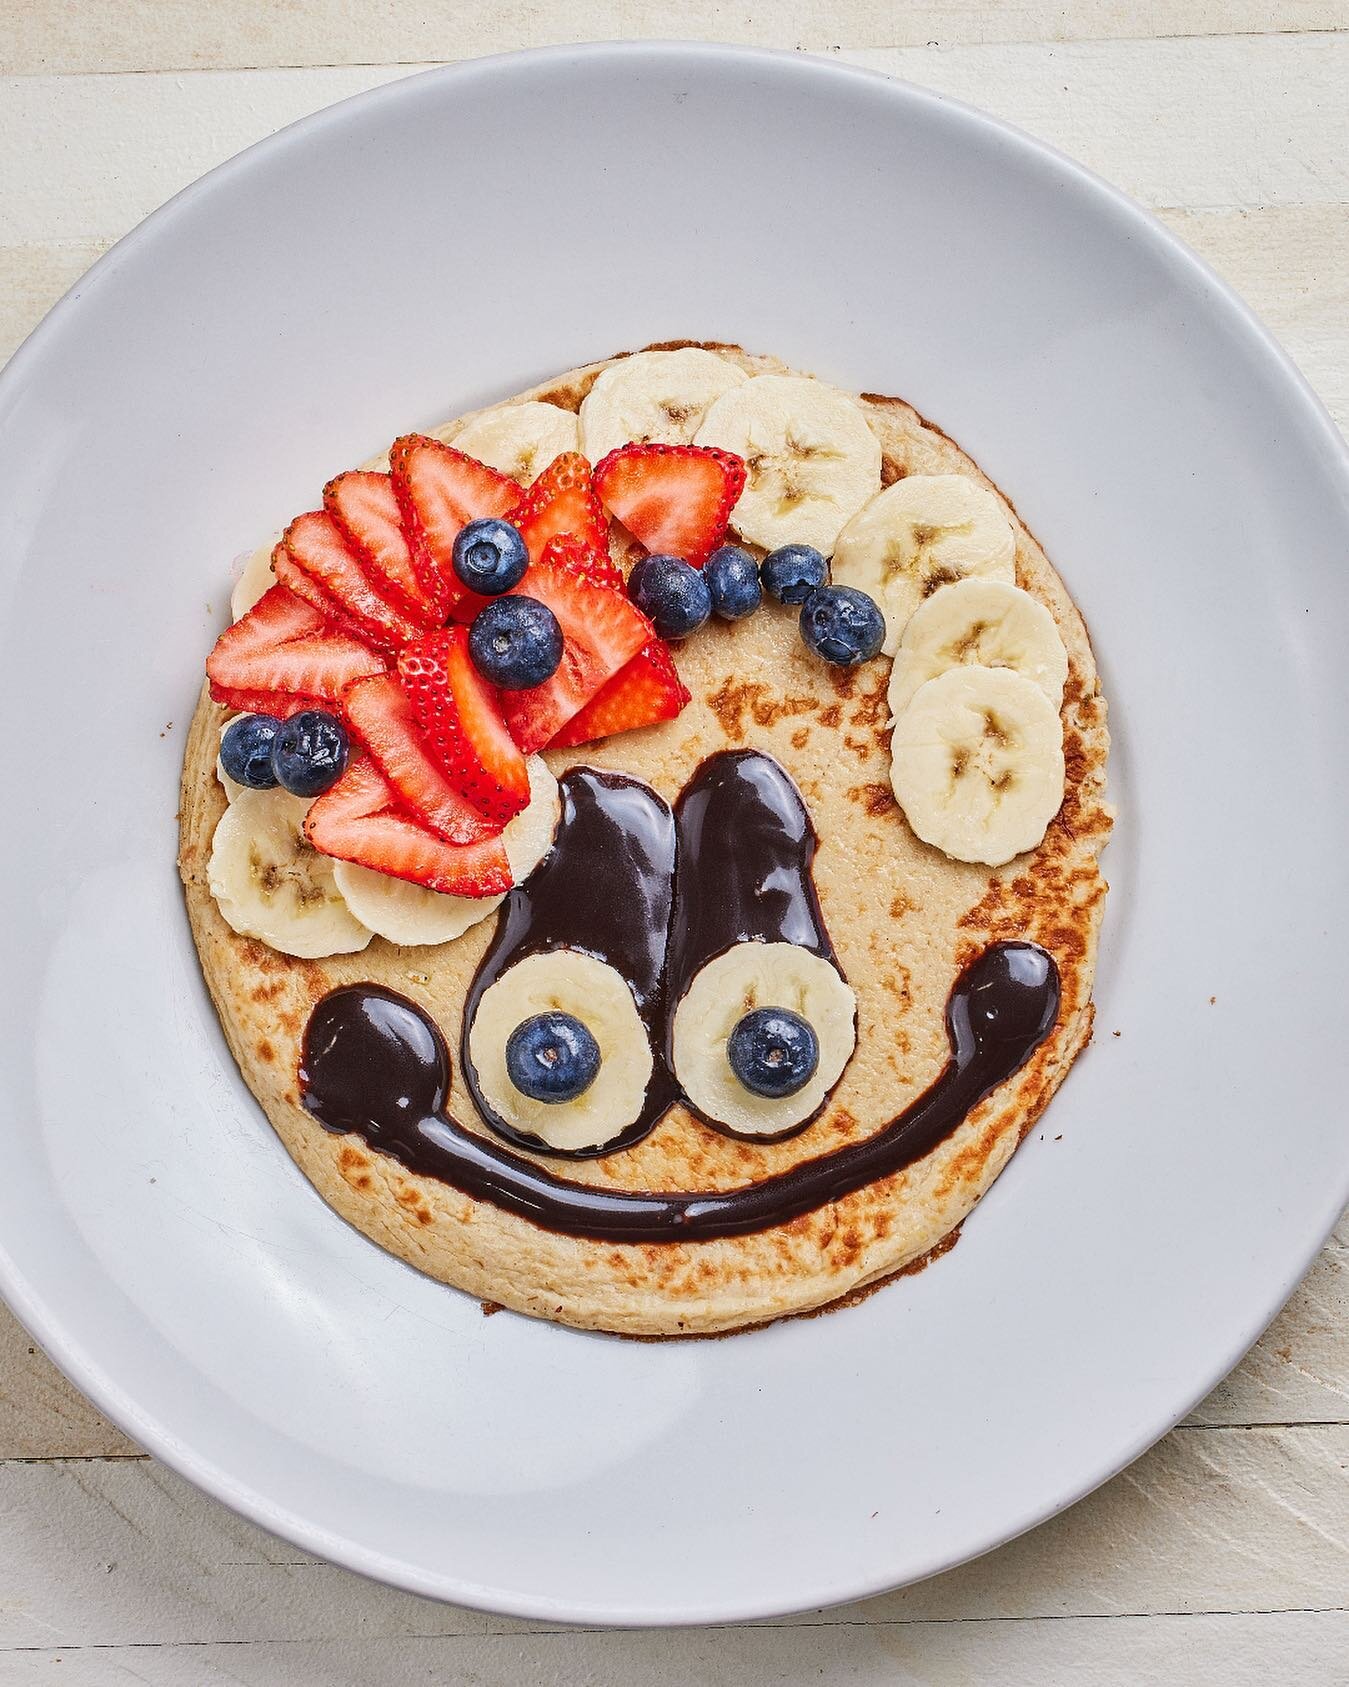 Happy Oatmeal Pancakes 🥞 specially made for kids. Healthy and super yummy, they&rsquo;re gonna love this Sunday treat. 💜
.
.
.
.
#pancakes #kidsmenu #oatmealpancakes #breakfast #healthyfood #desayuno #comidasaludable #desayunosaludable